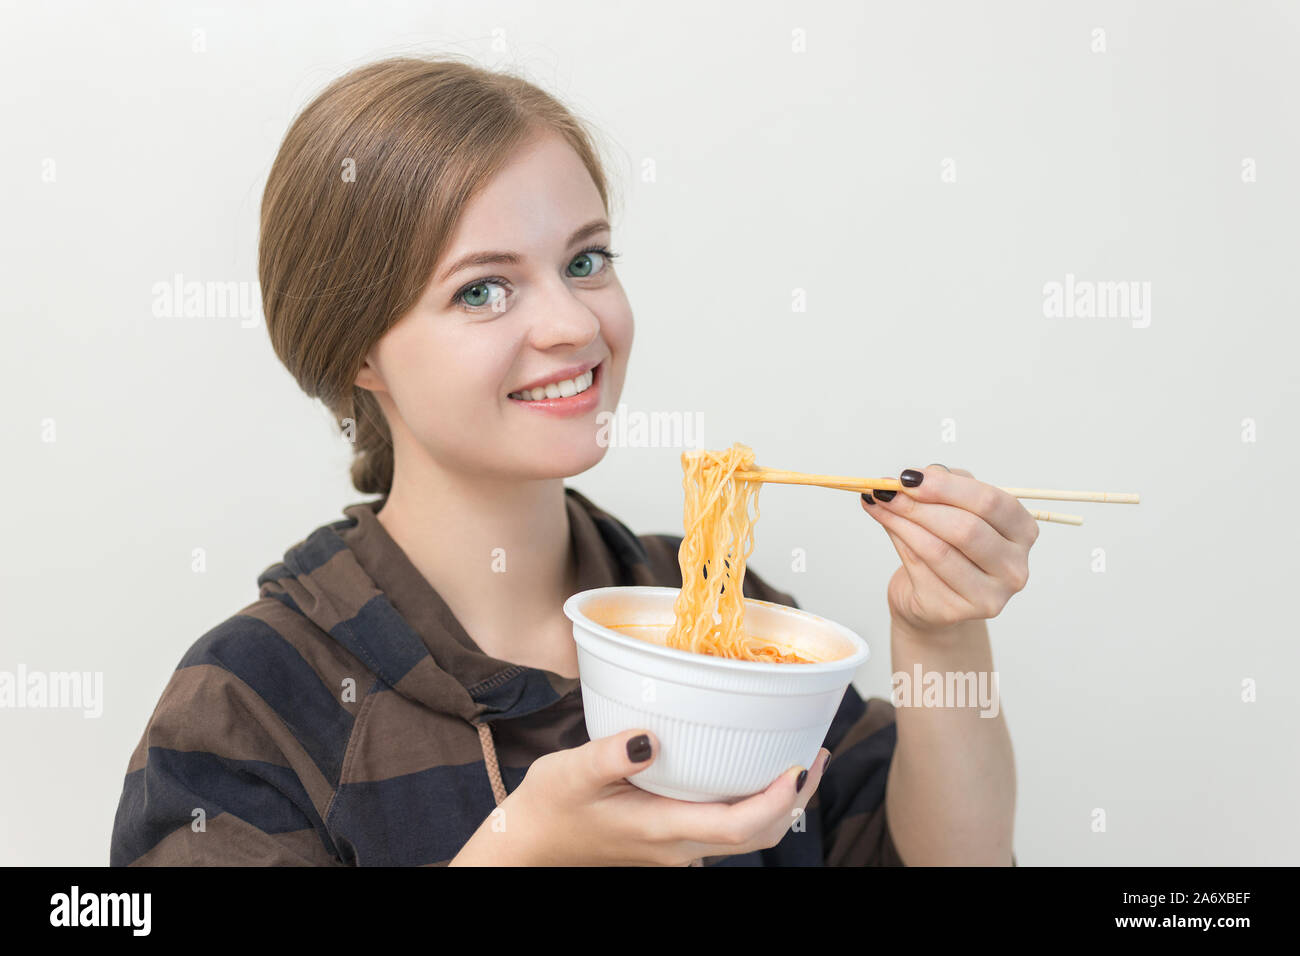 Young caucasian girl woman eating instant ramen noodles with chopsticks Banque D'Images